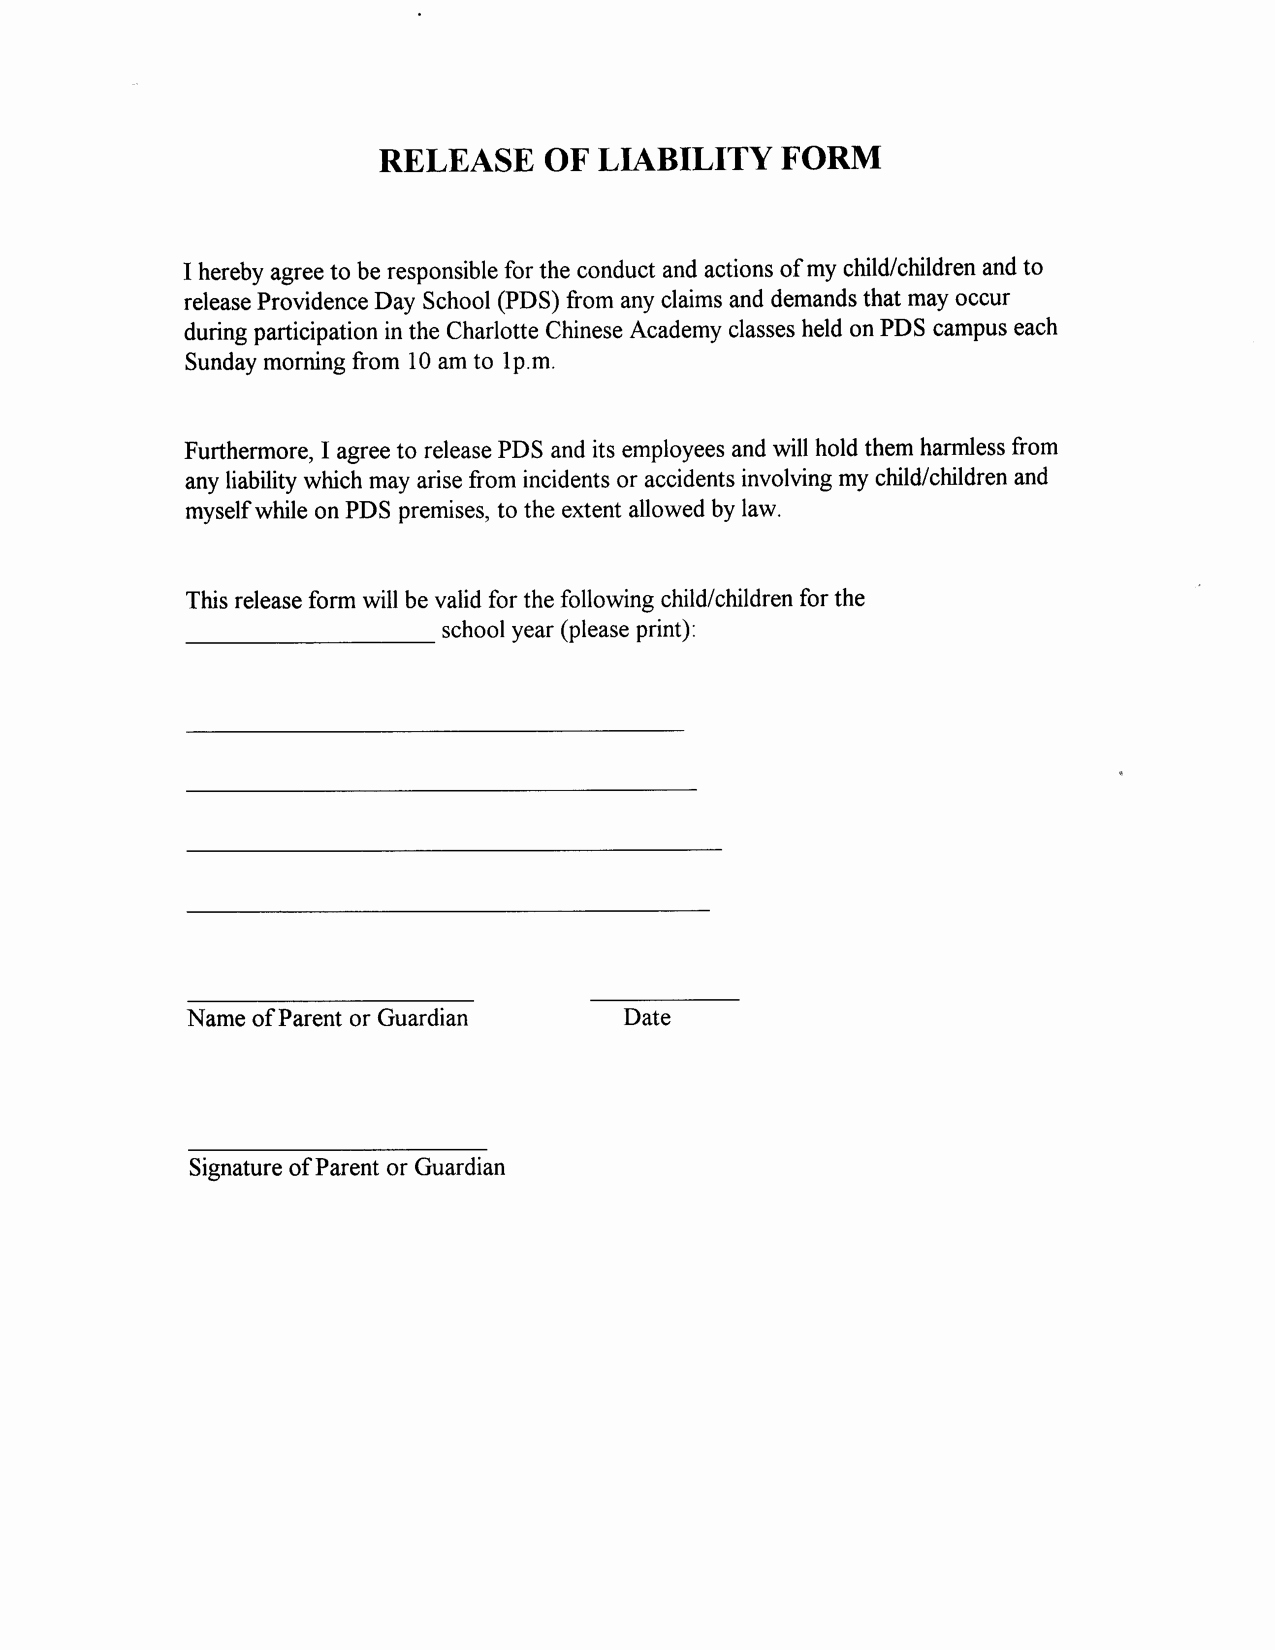 Free Liability Waiver Template Best Of Liability Release form Template In Images Release Of